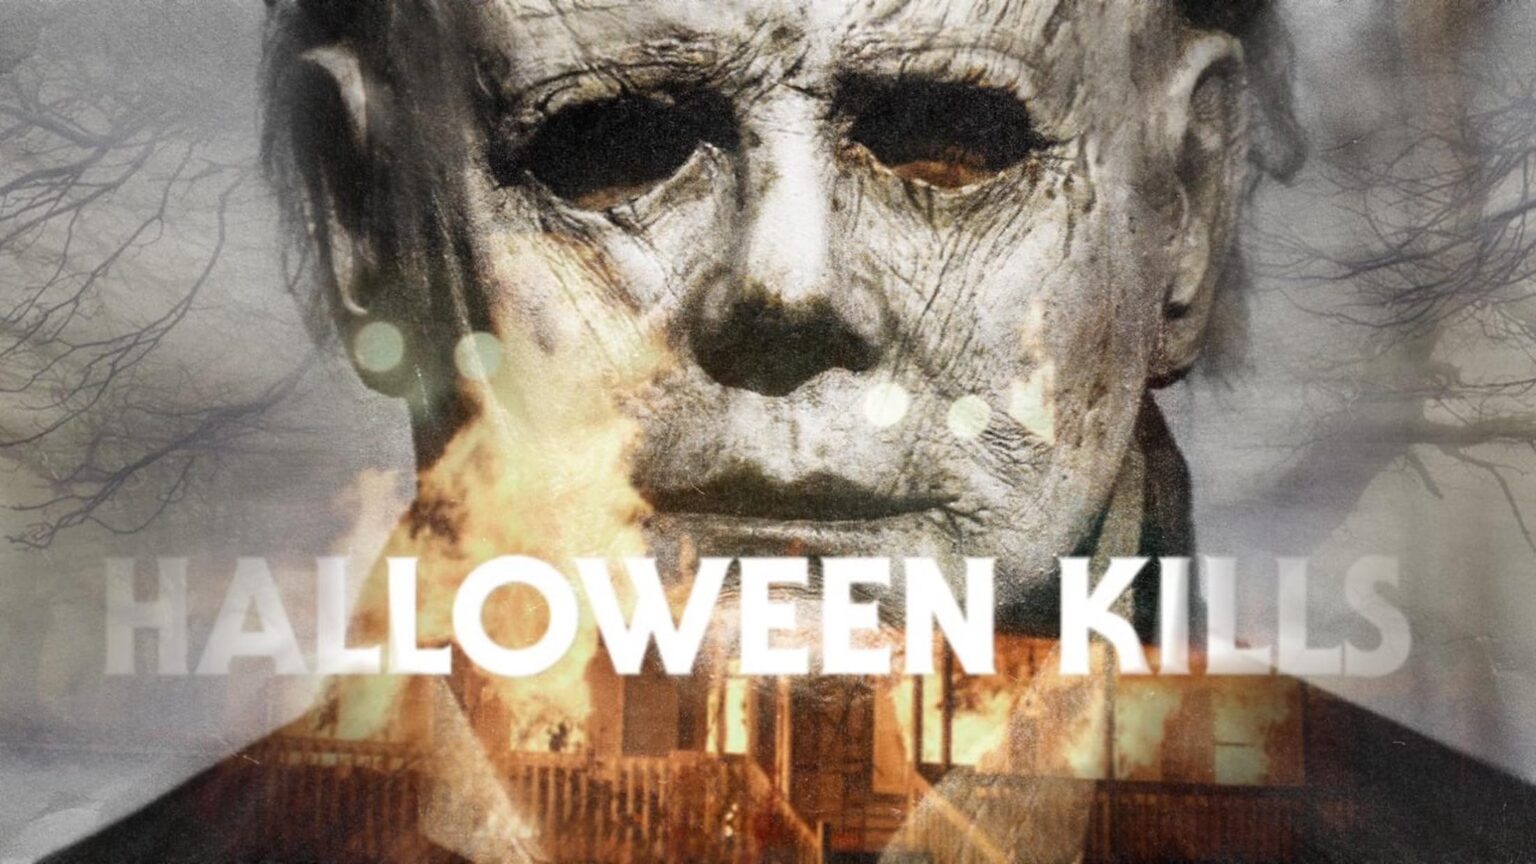 Michael Myers is making his return to the big screen in Halloween Kills, the newest addition to a film franchise spanning four decades.